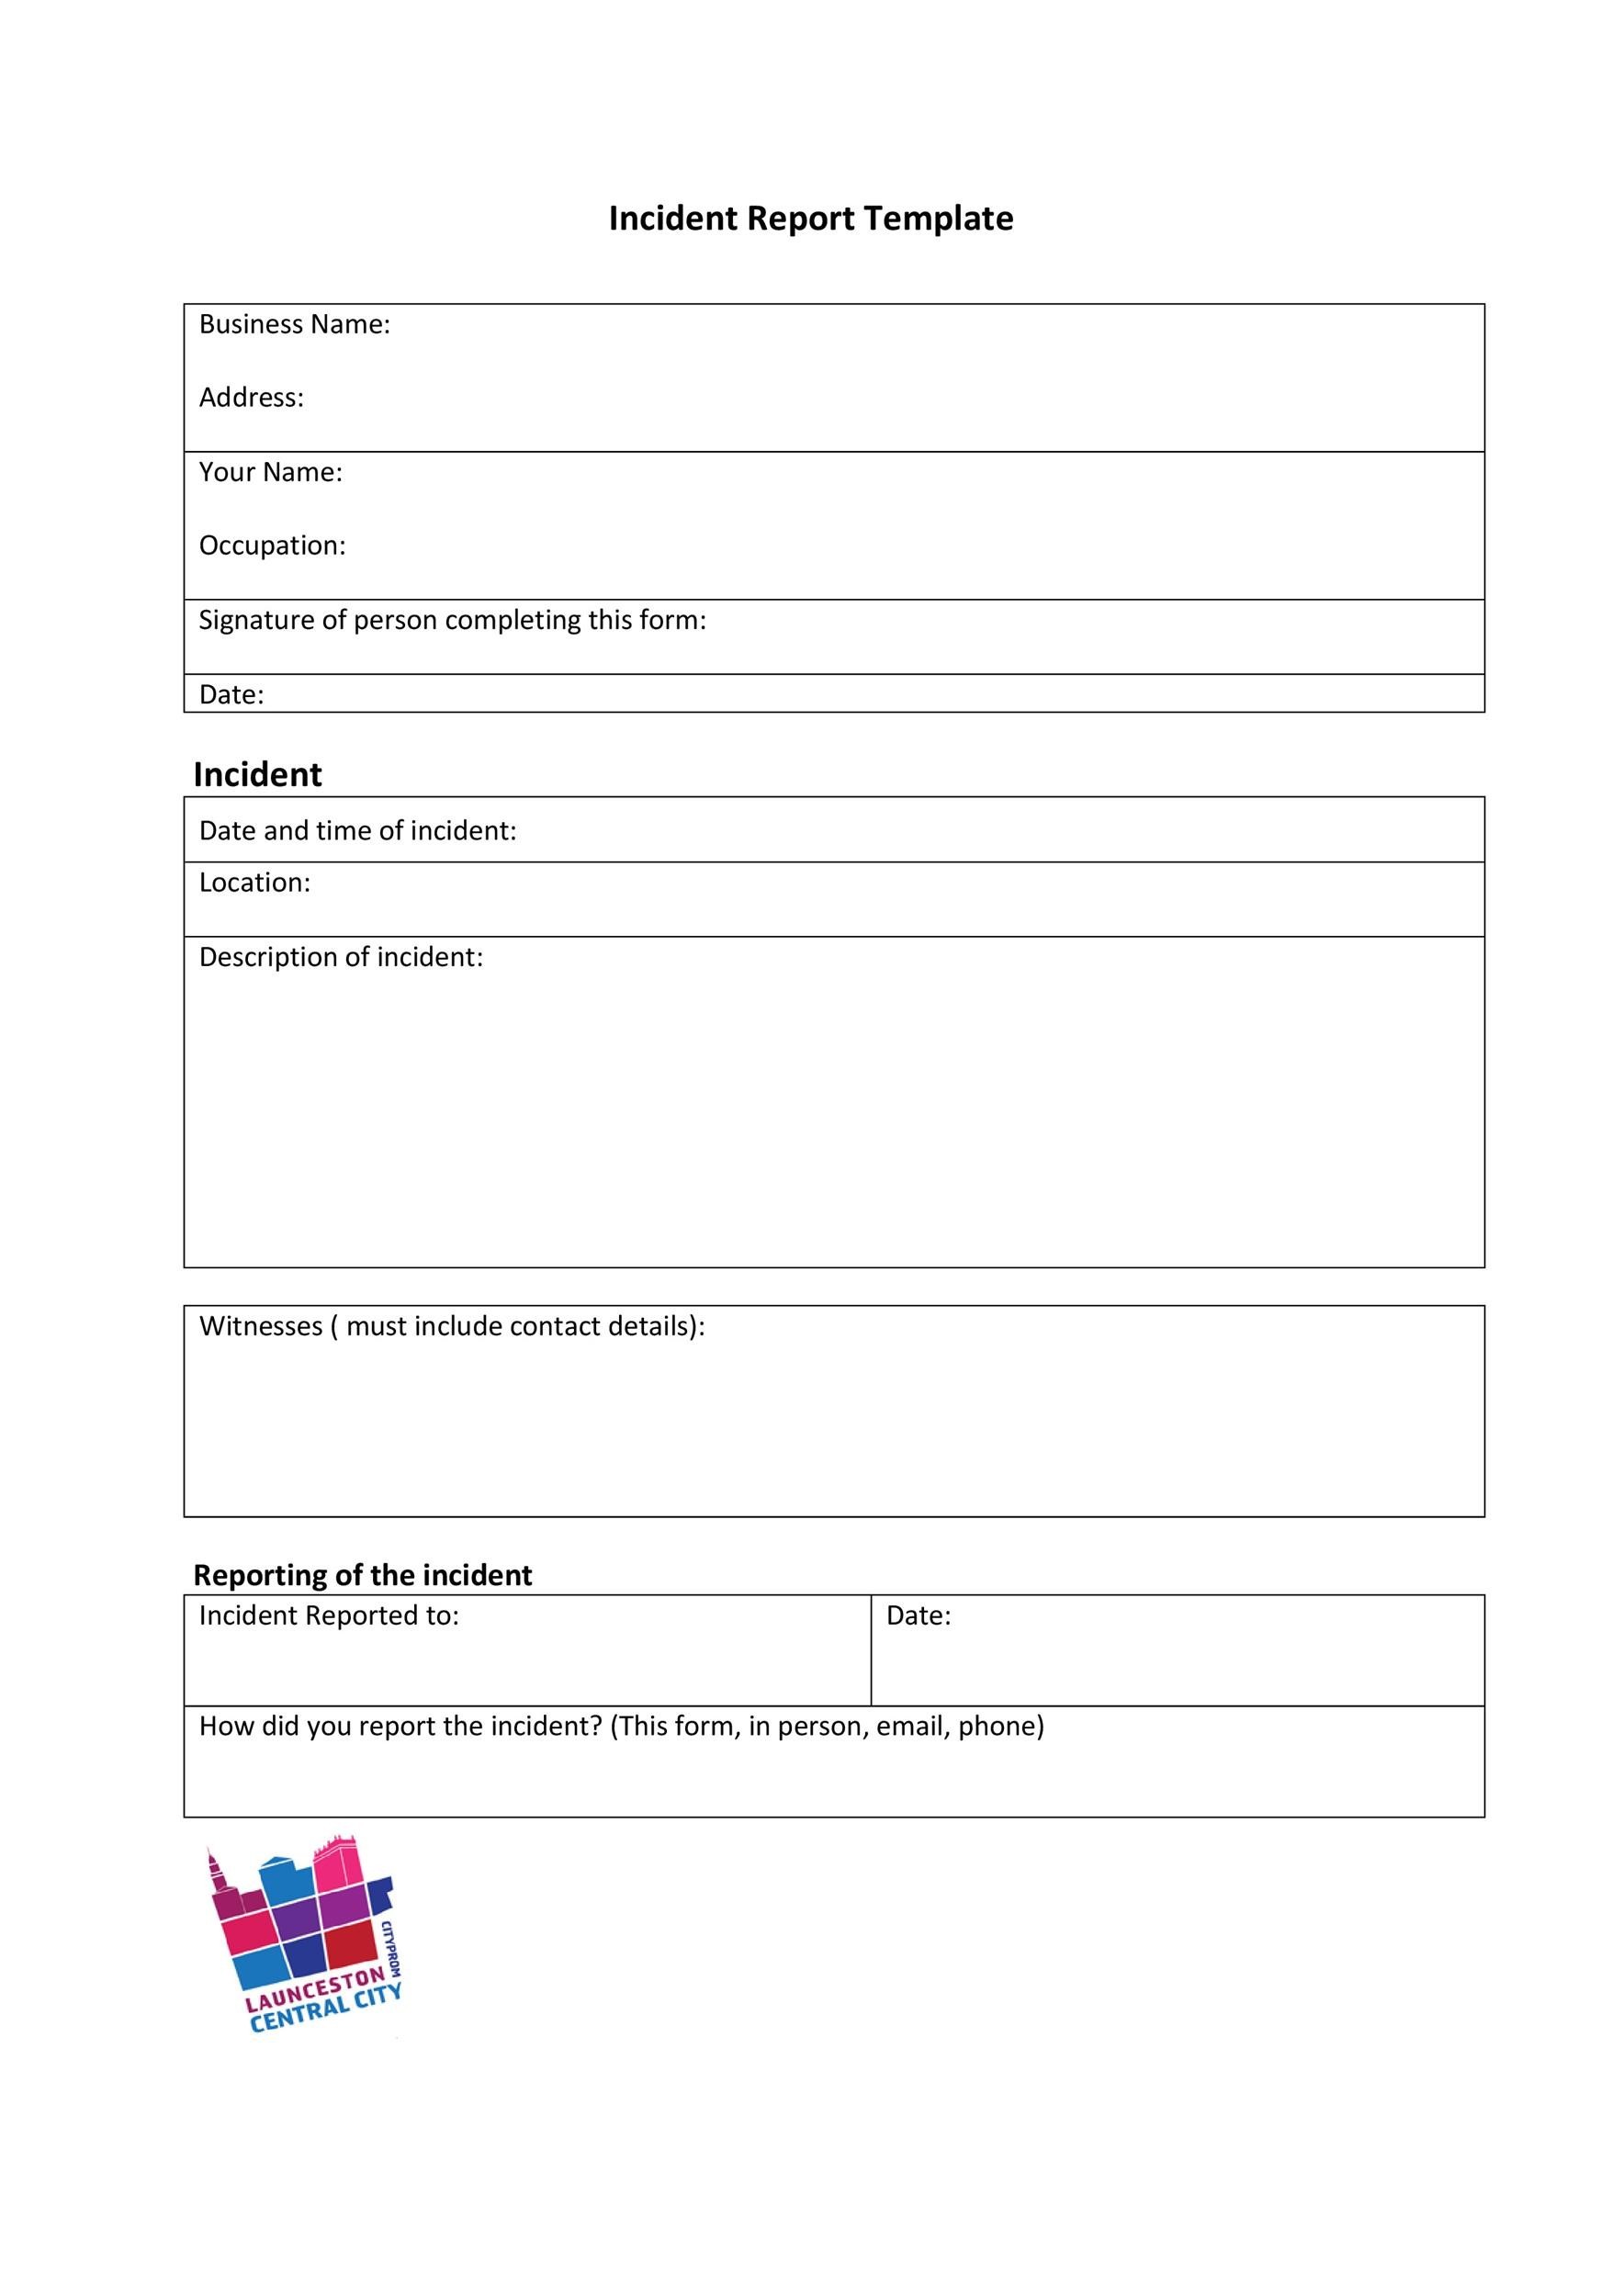 how-do-i-create-an-incident-report-template-printable-form-templates